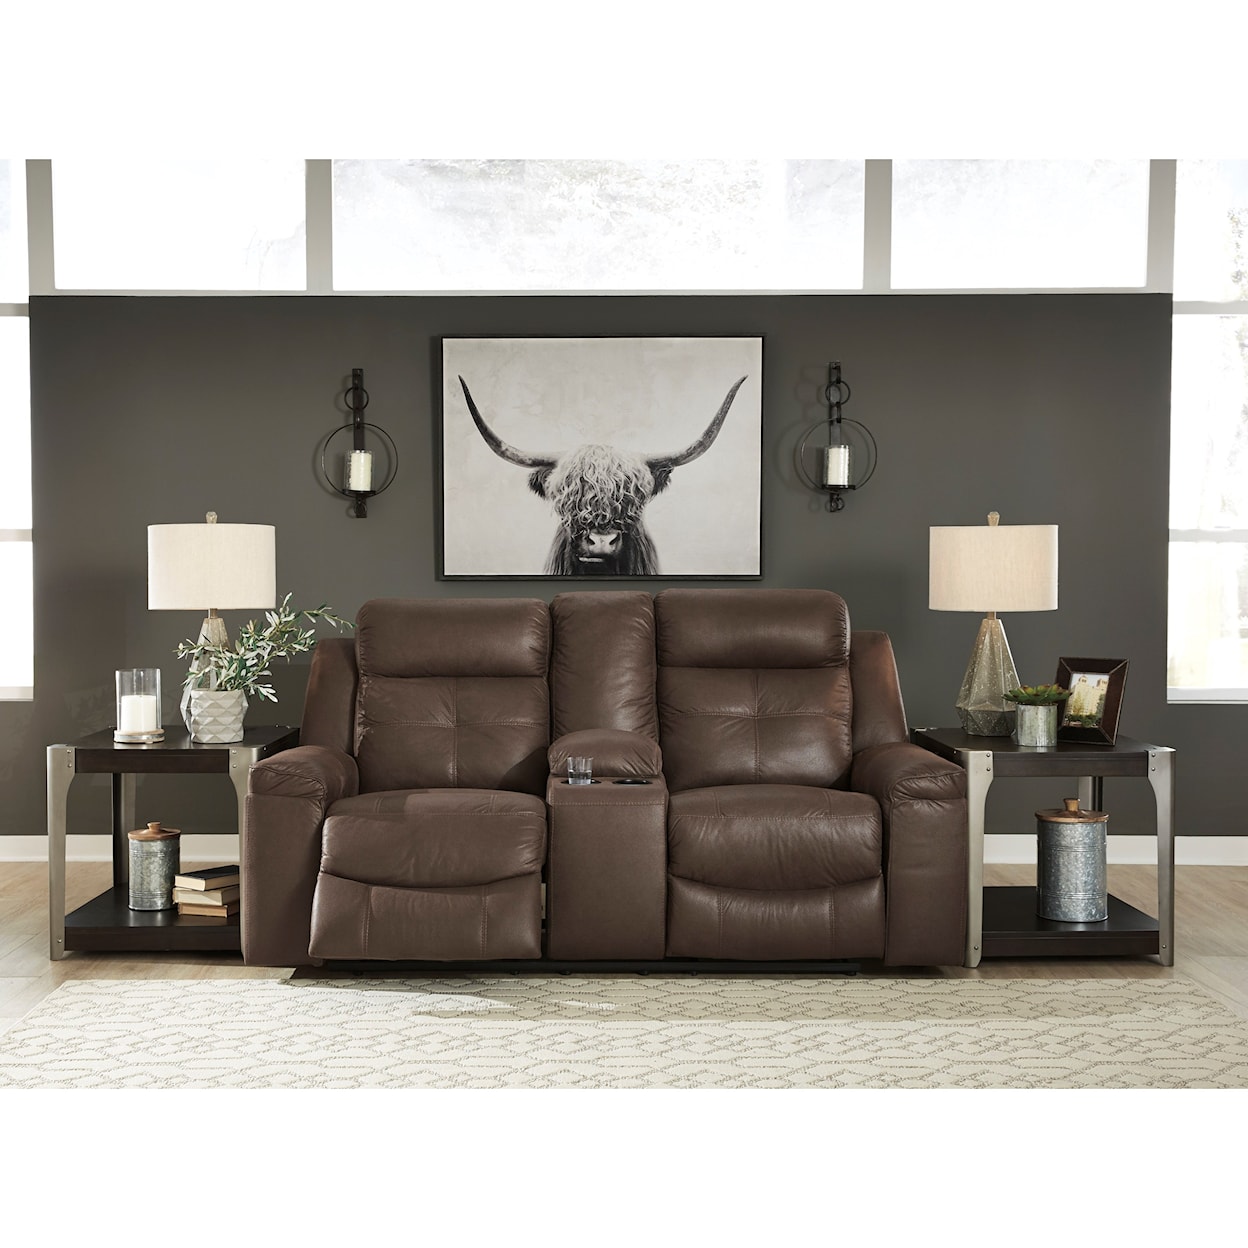 Signature Design Jesolo Double Reclining Loveseat with Console